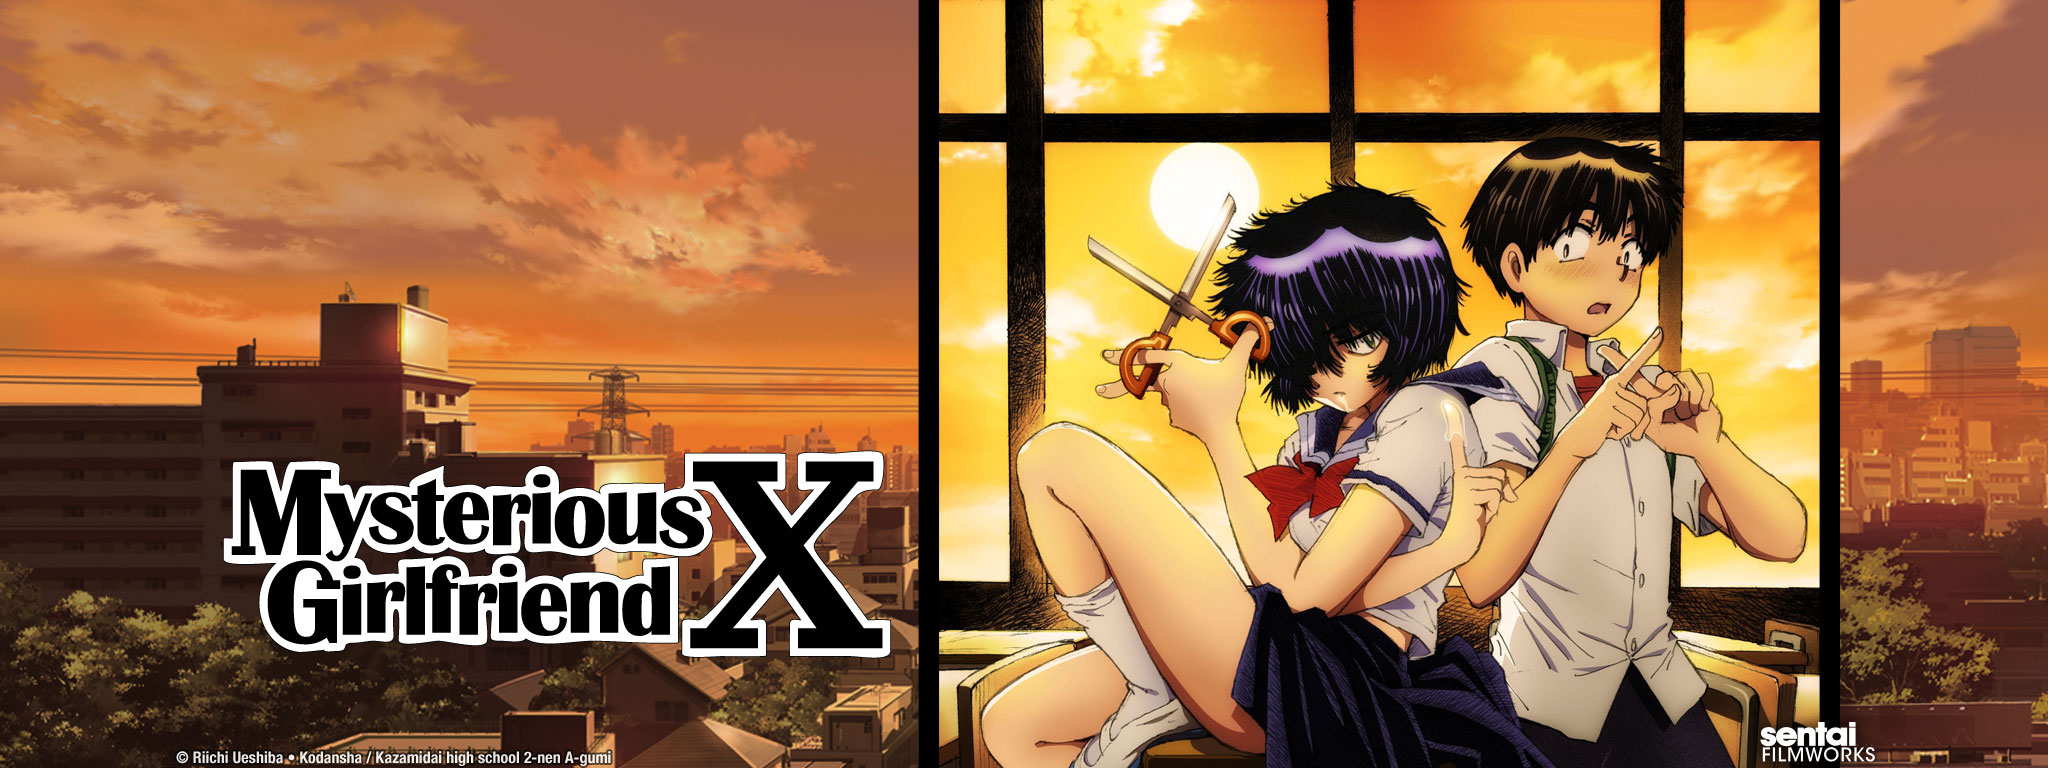 Anime Mysterious Girlfriend X HD Wallpapers. 